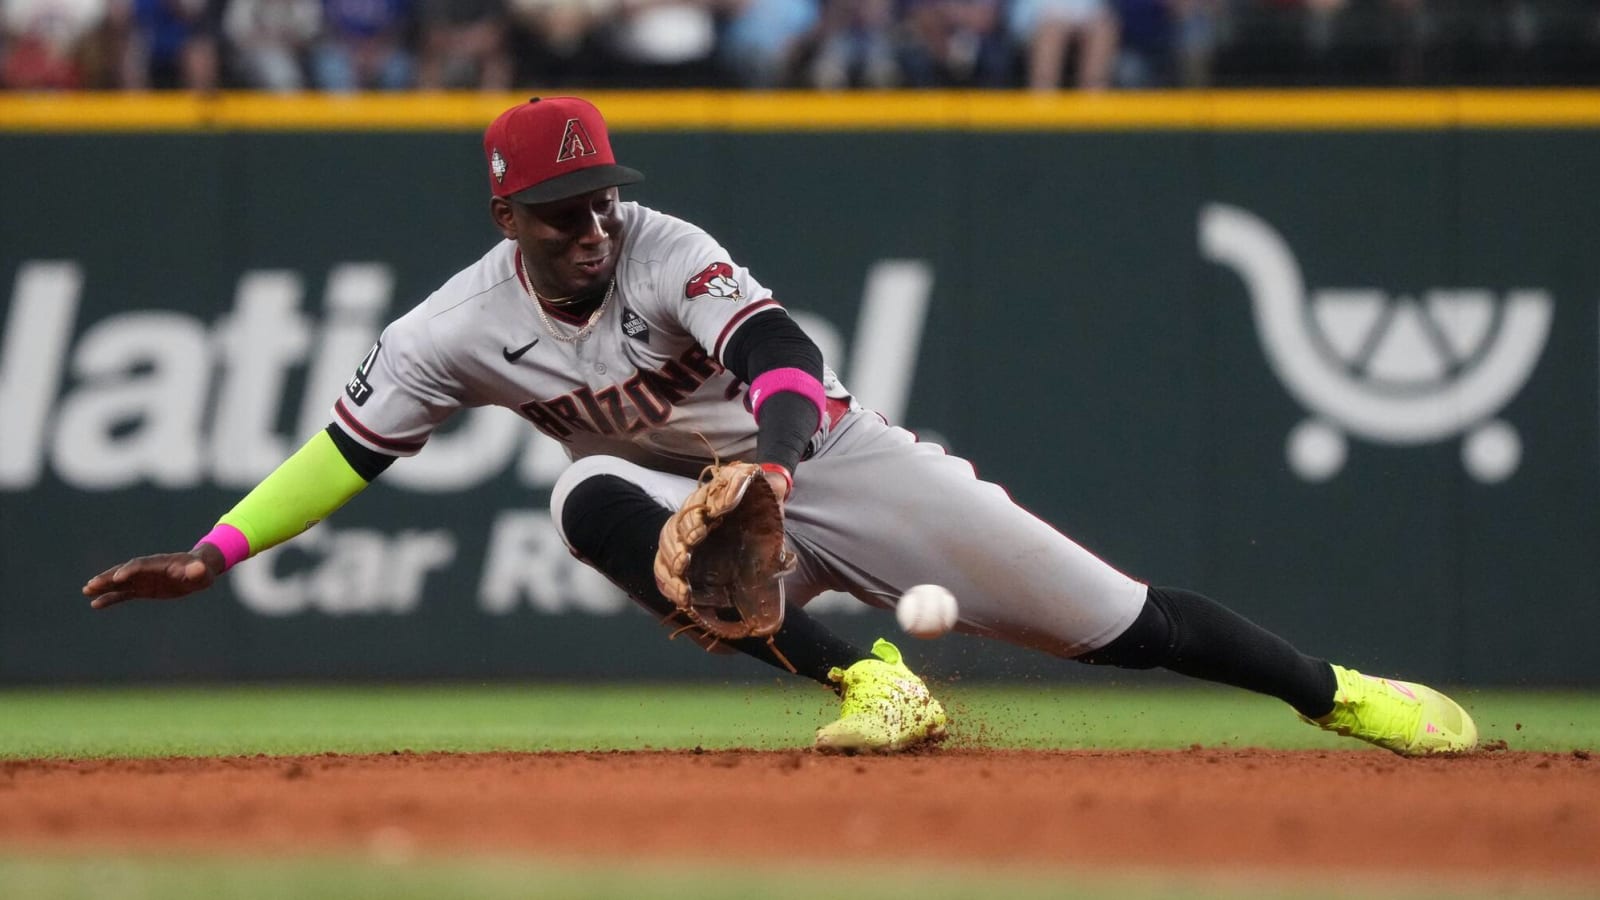 With a top prospect rostered, who will start at shortstop for the Diamondbacks?